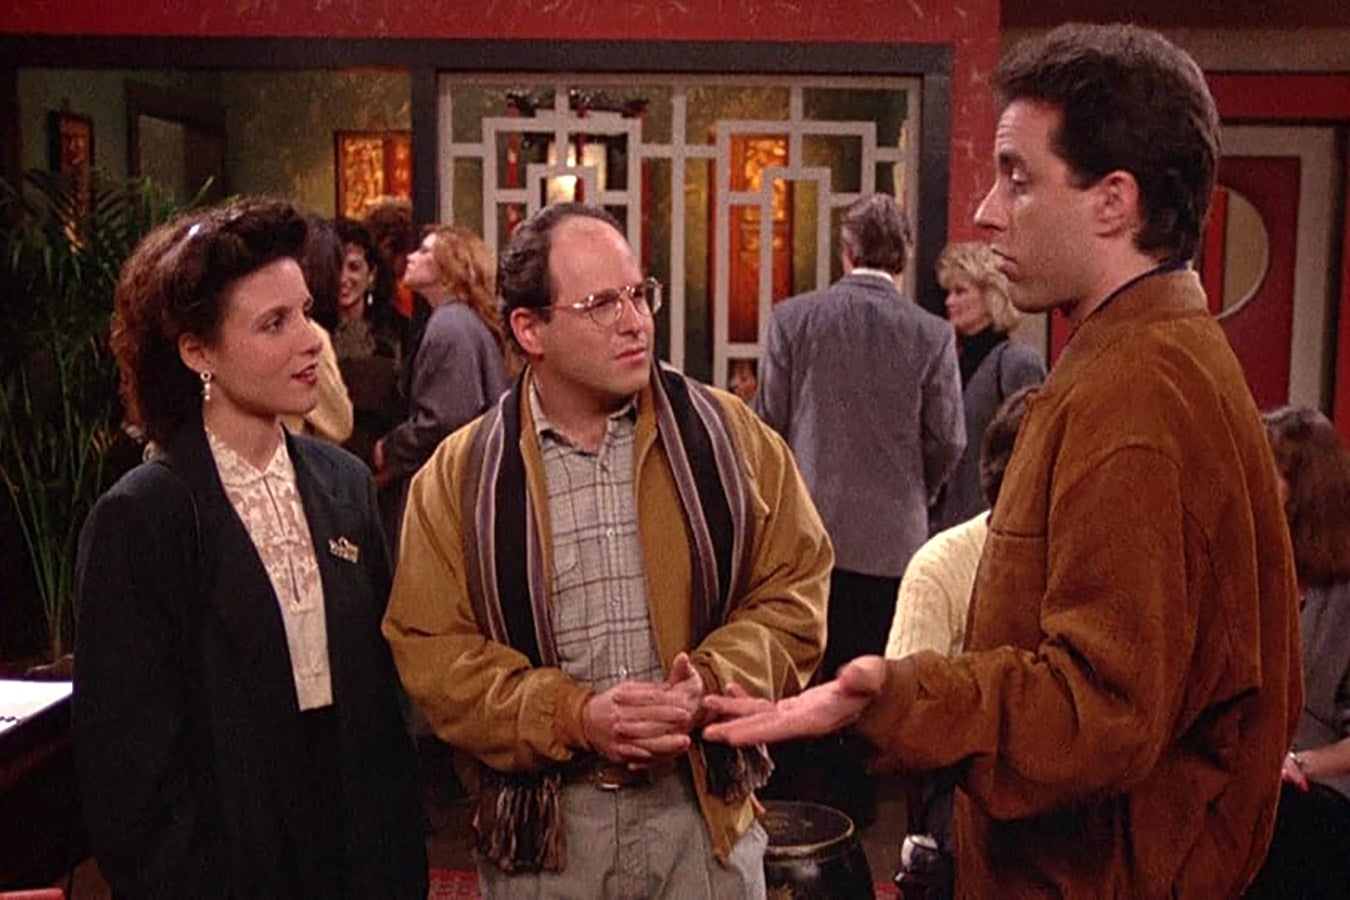 Elaine, George, and Jerry talk inside a restaurant.